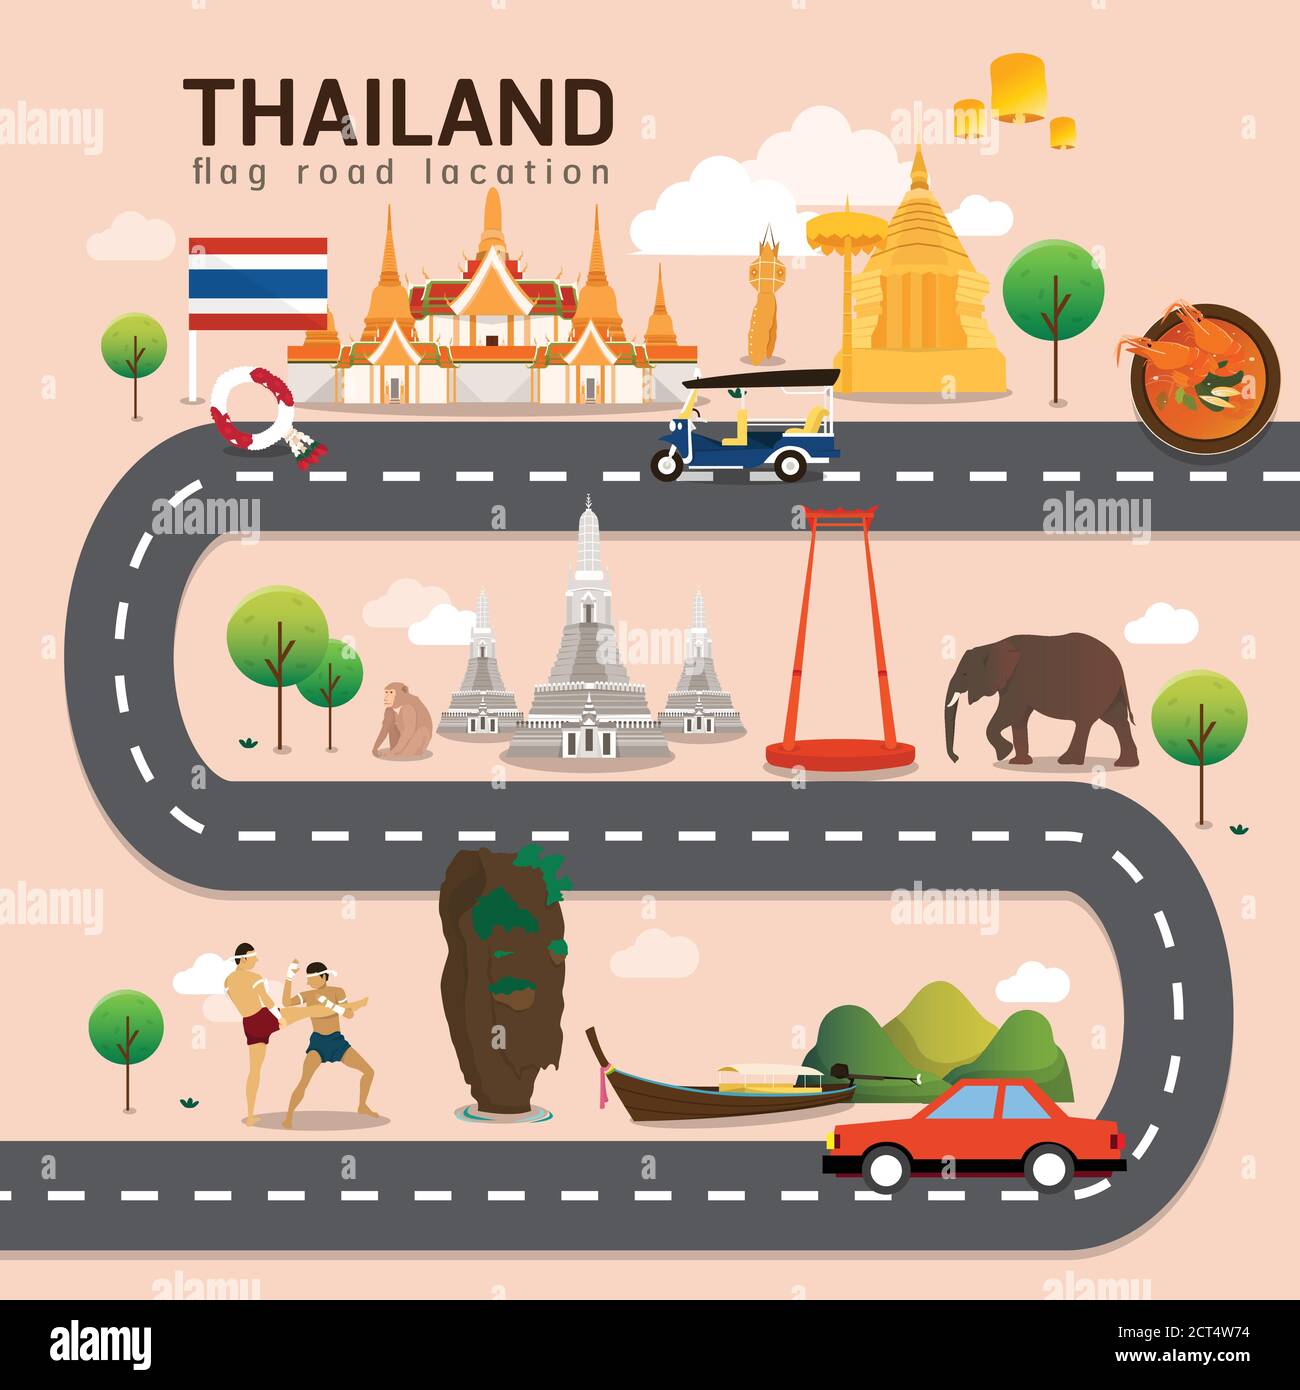 Road map and journey route in Thailand Stock Vector